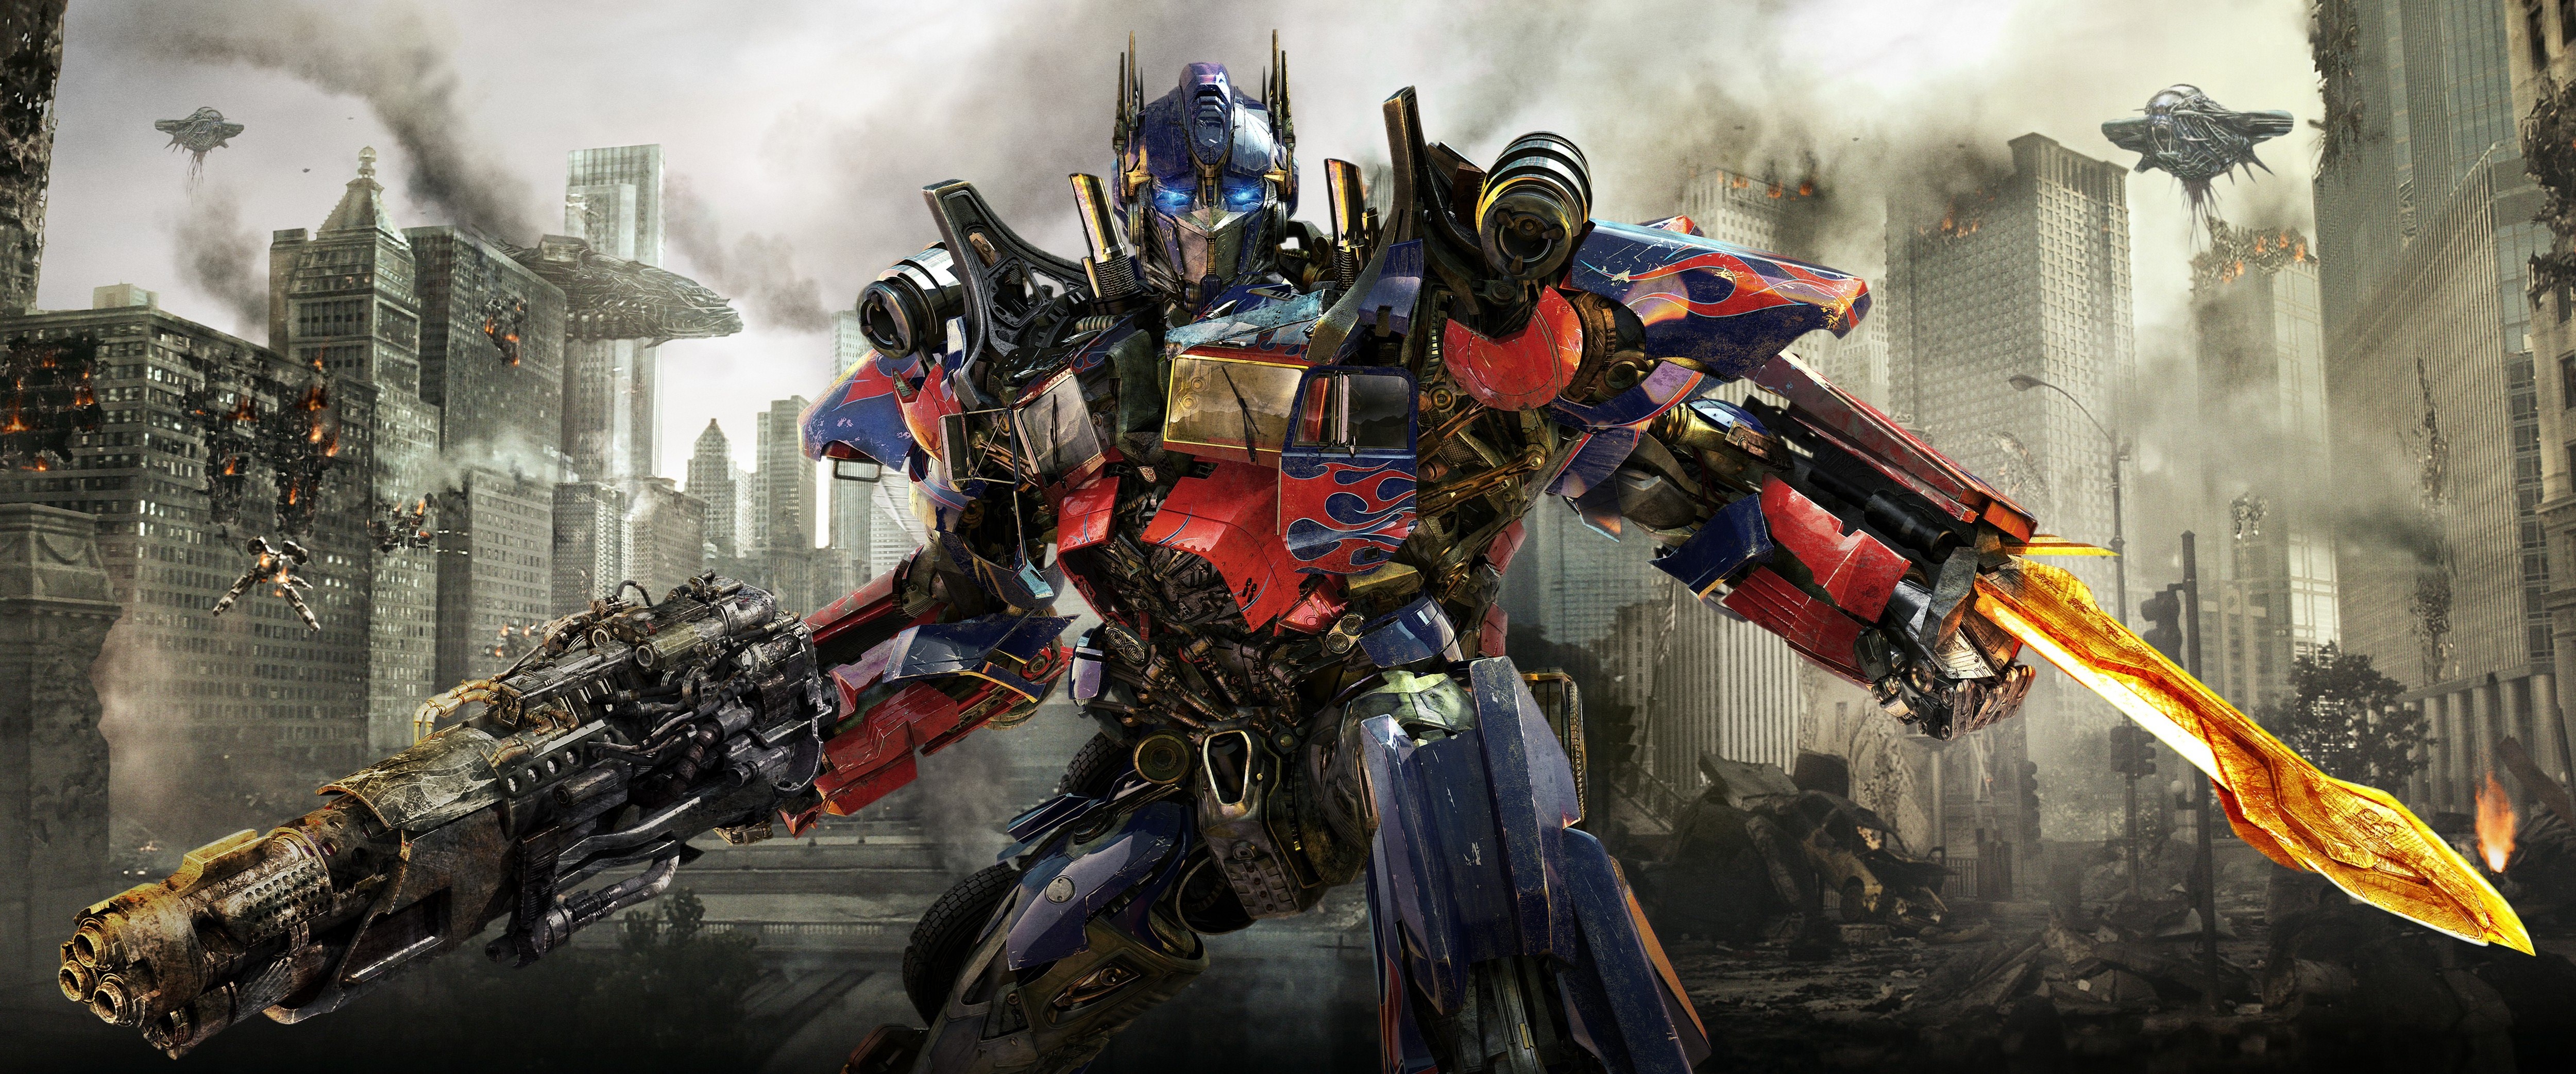 Movie Transformers: Dark of the Moon HD Wallpaper | Background Image